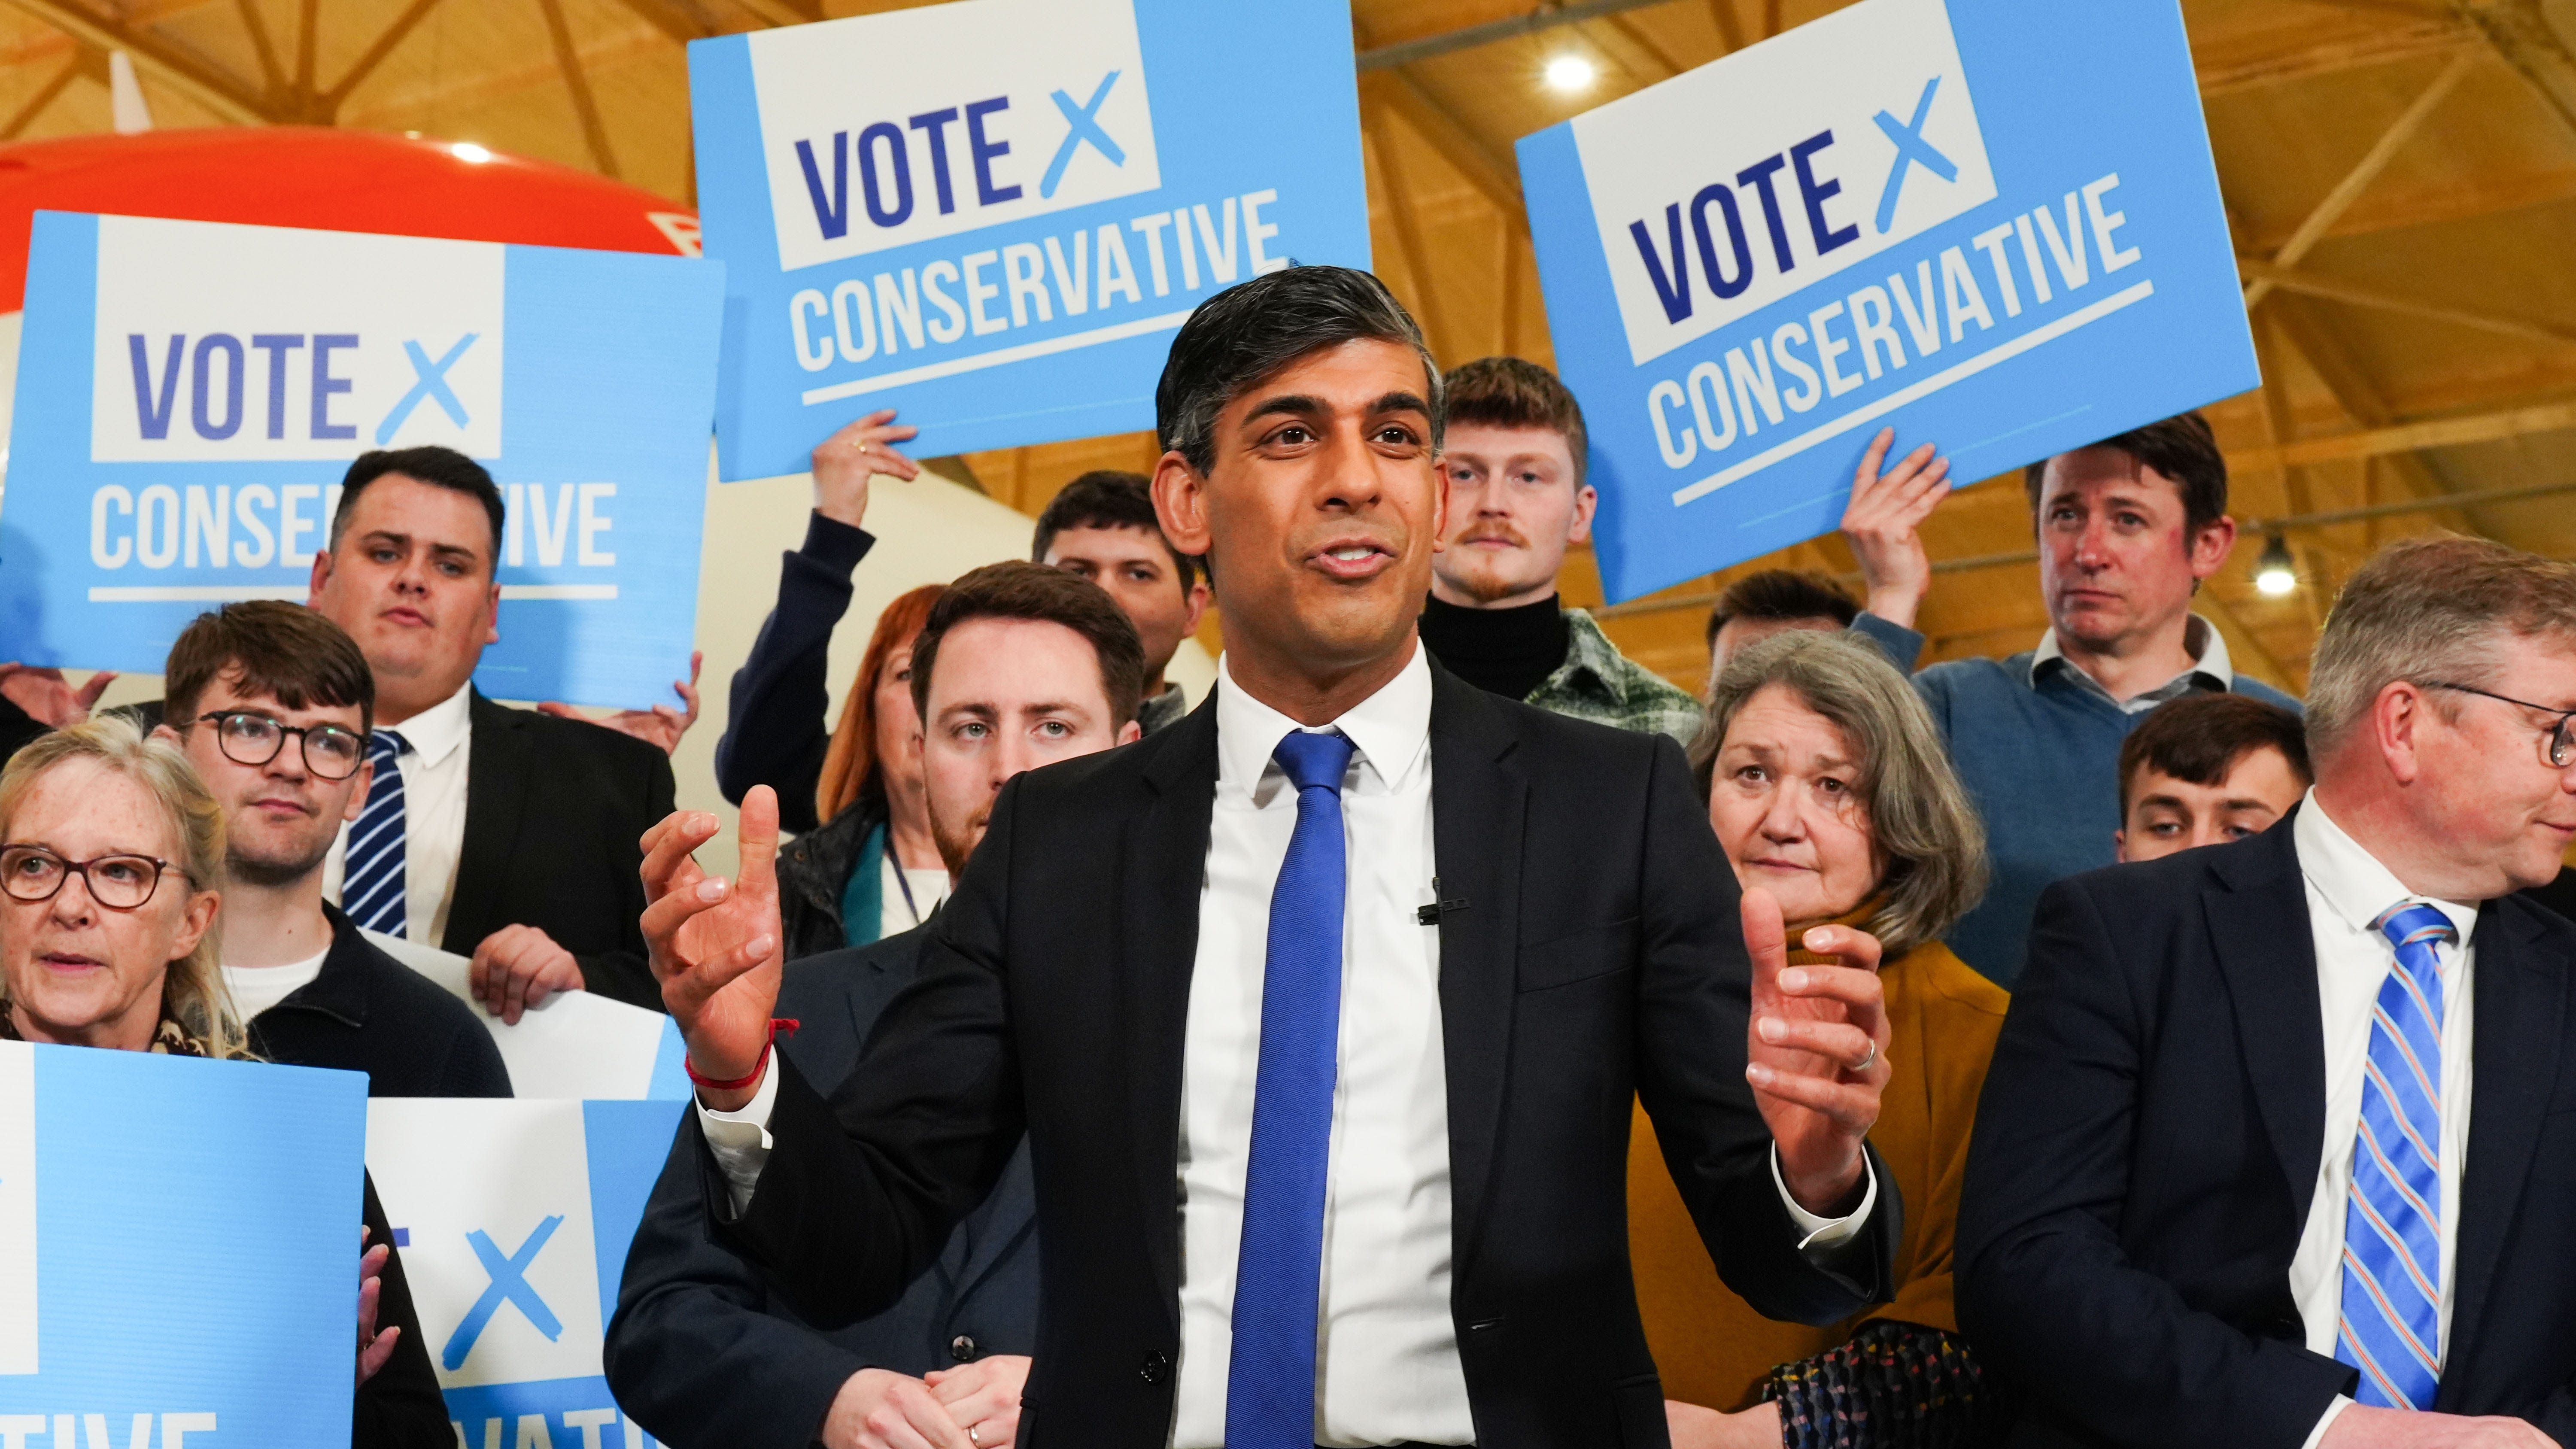 Rishi Sunak braces for West Midlands mayoral result as election counts continue